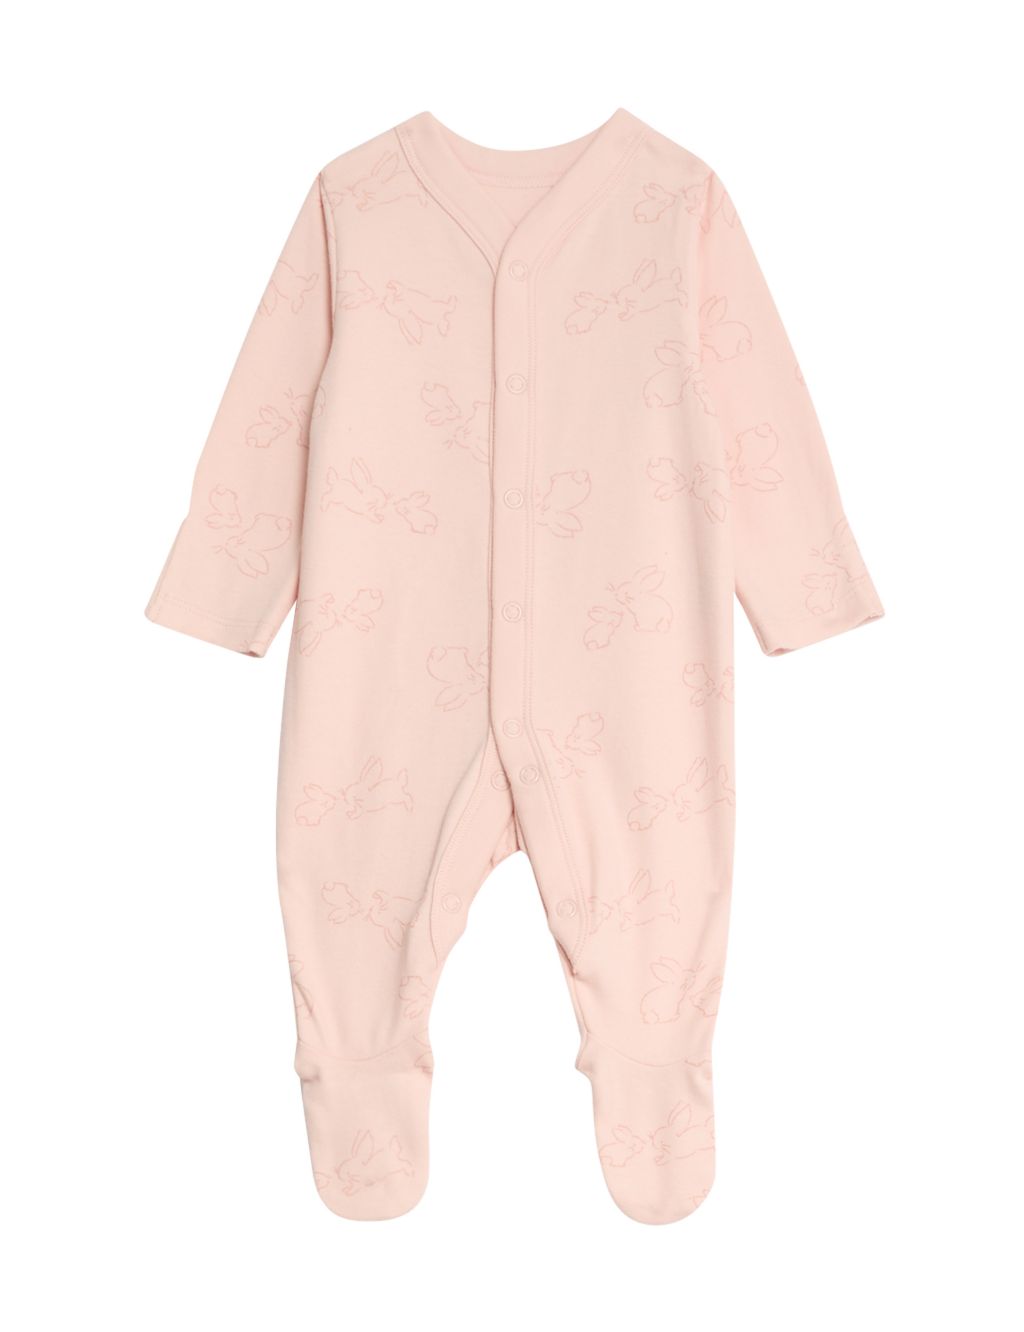 3pk Pure Cotton Bunny & Striped Sleepsuits (5lbs-3 Yrs) image 2